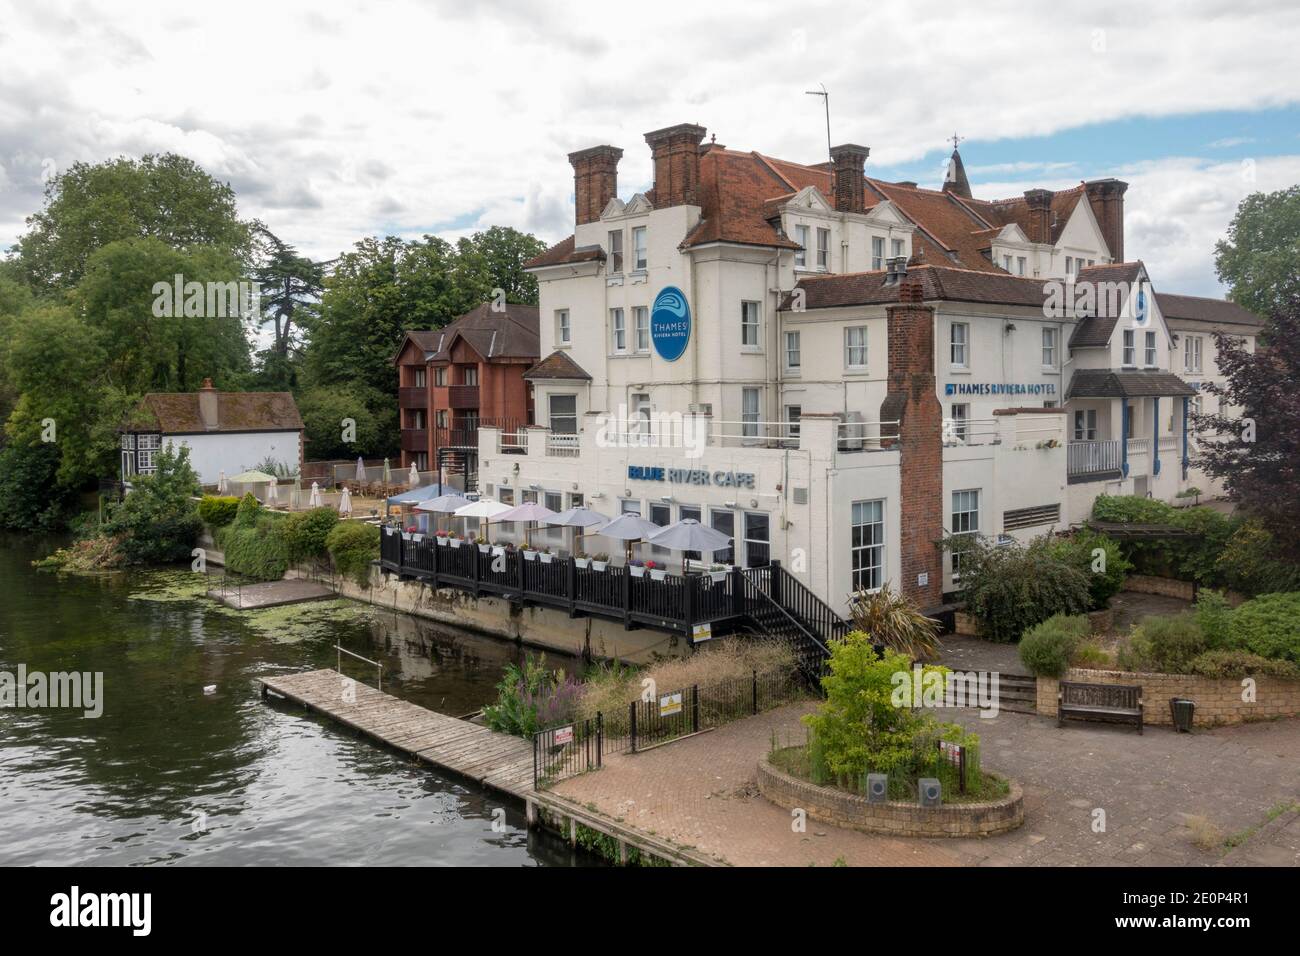 The Blue River Cafe beside the River Thames in Maidenhead, Berkshire, UK. Stock Photo